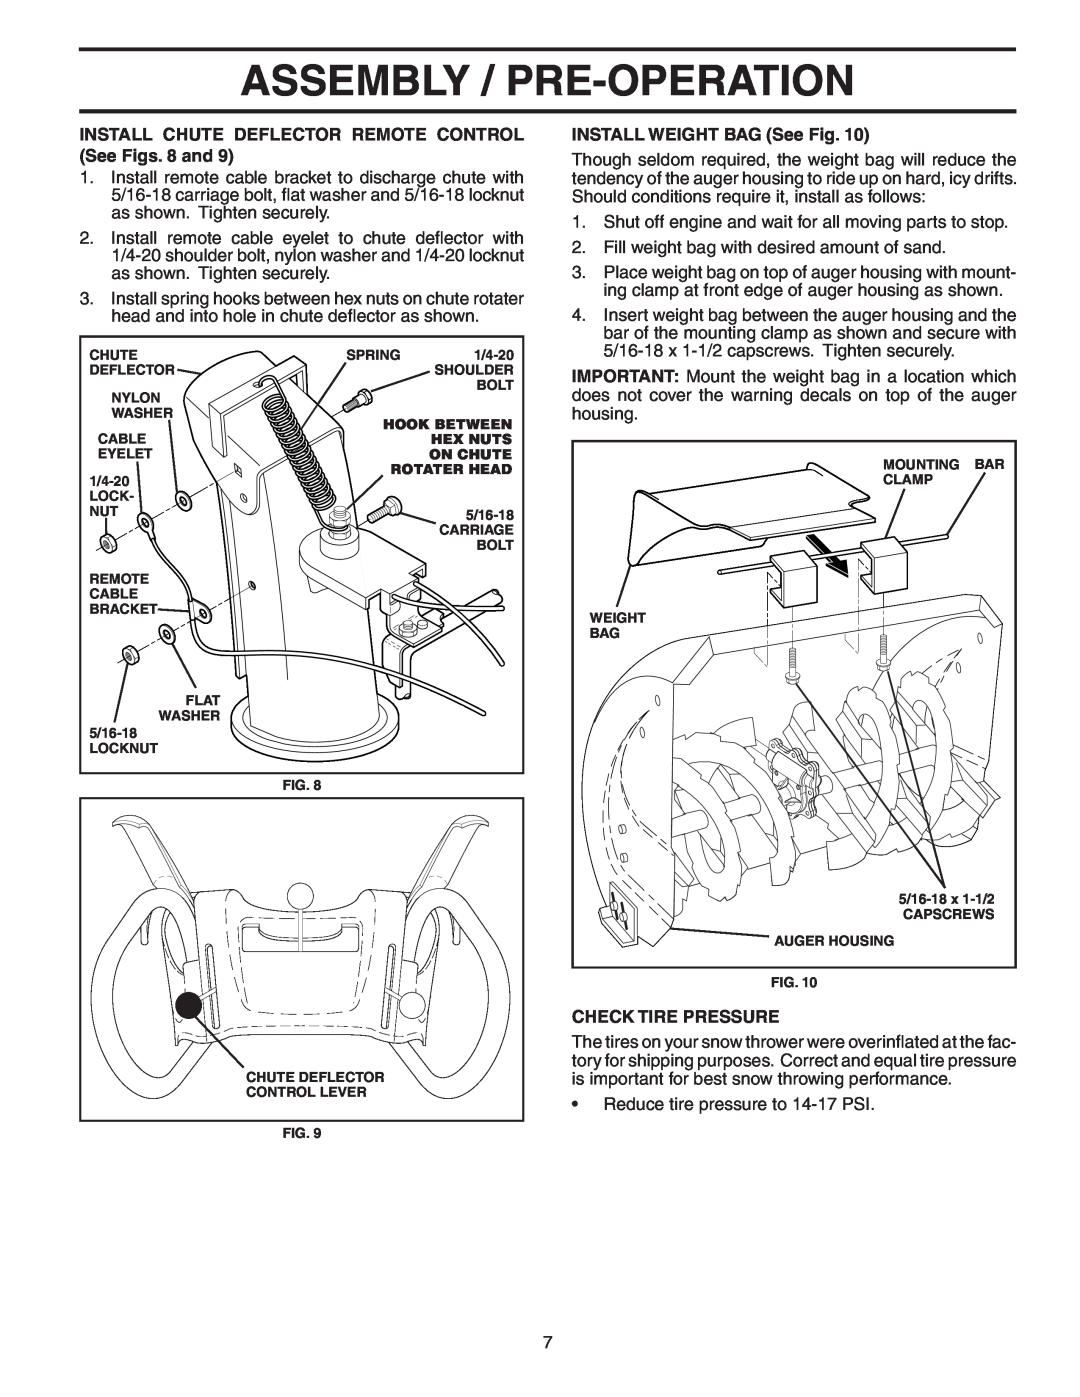 Poulan P8527ESA Assembly / Pre-Operation, INSTALL CHUTE DEFLECTOR REMOTE CONTROL See Figs. 8 and, Check Tire Pressure 